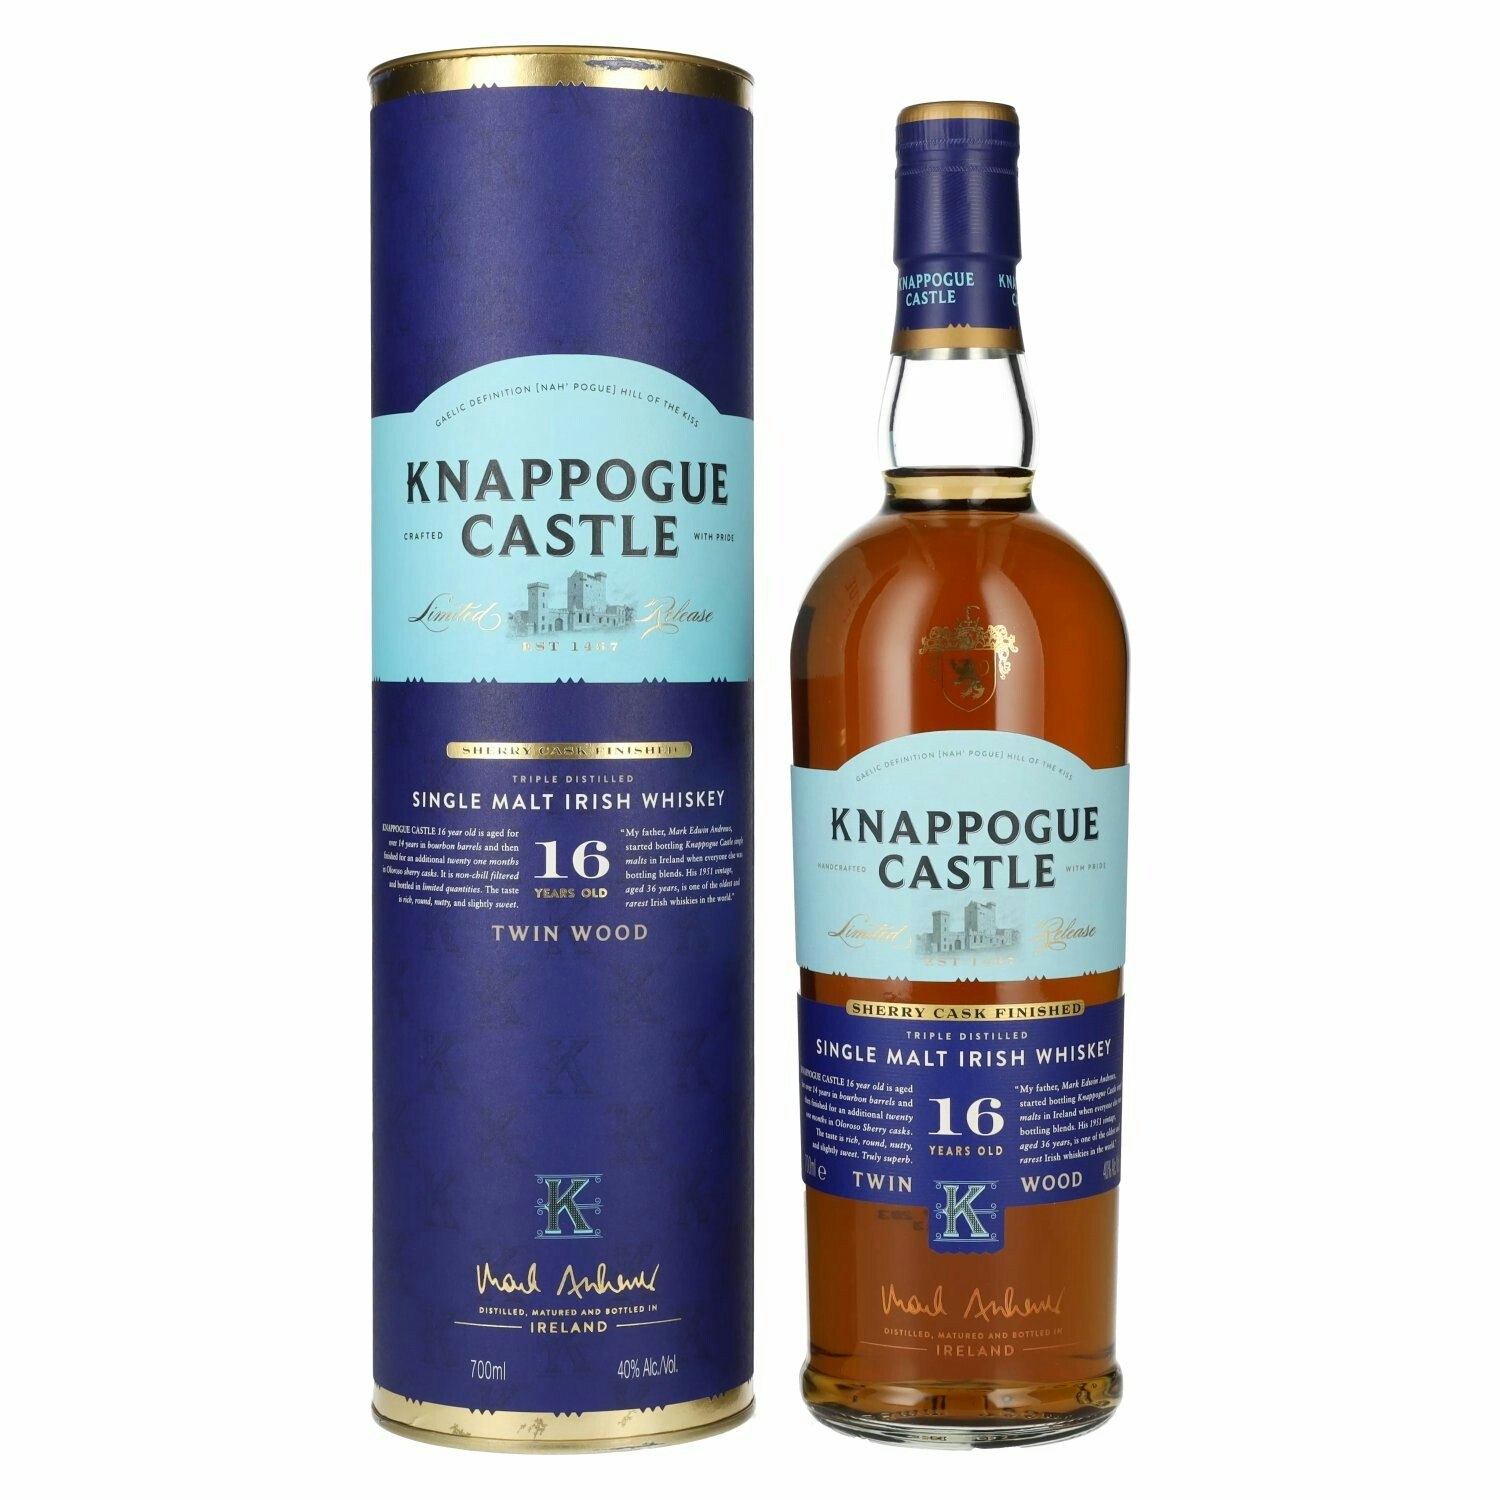 Knappogue Castle 16 Years Old TWIN WOOD SHERRY CASK FINISHED 40% Vol. 0,7l in Giftbox